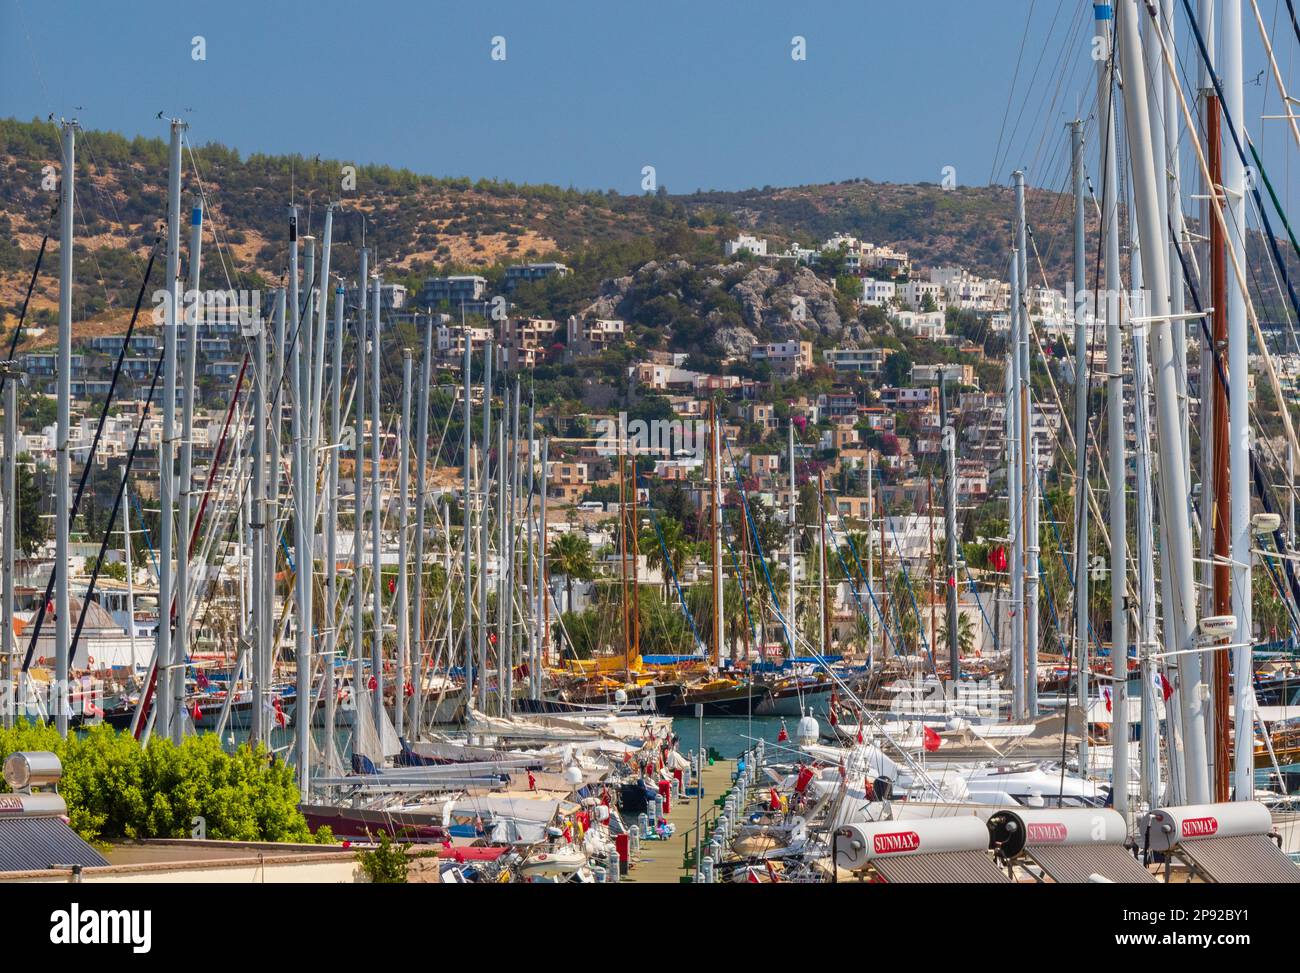 yachts moored in Bodrum harbour, Turkey Stock Photo